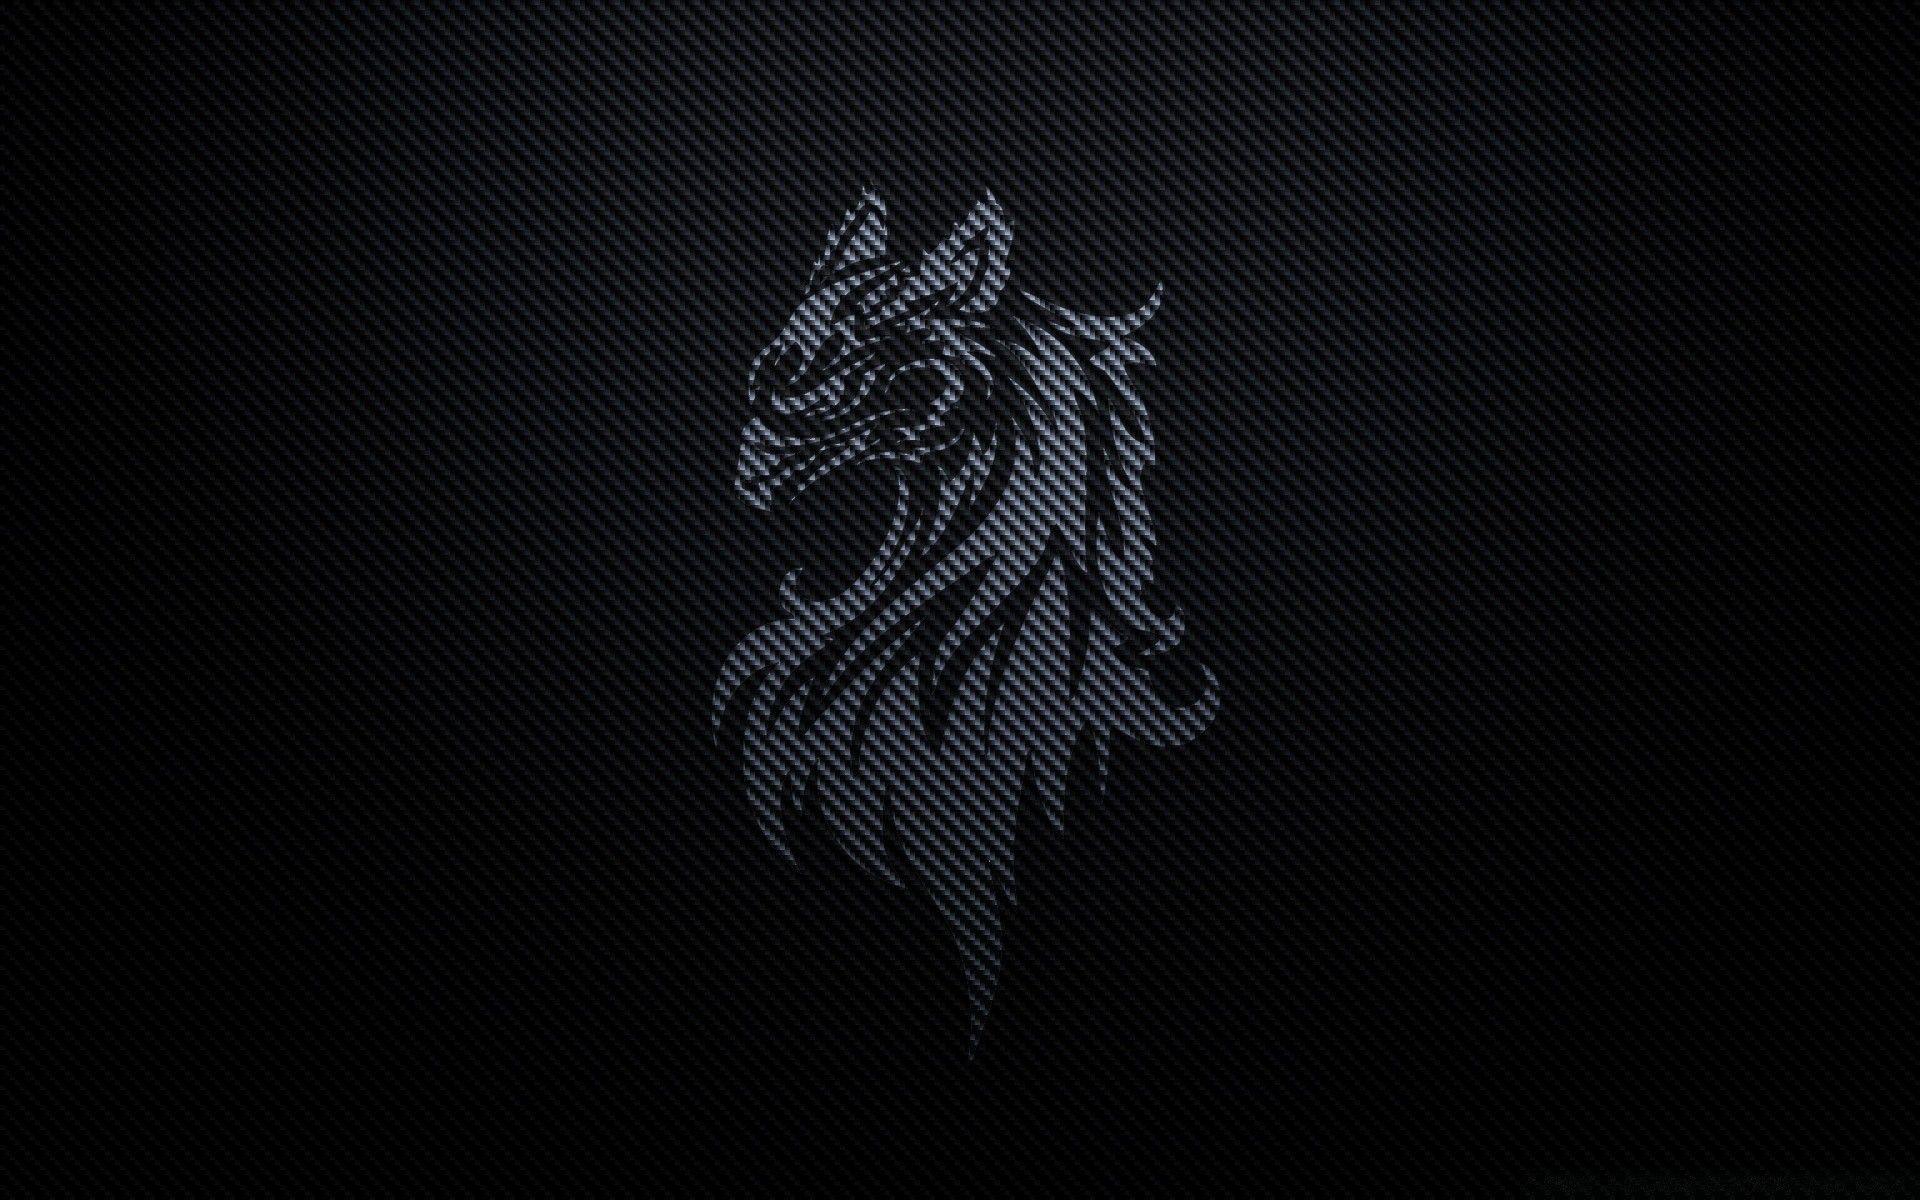 Carbon Fiber Gryffin By Betahouse. Android wallpaper for free